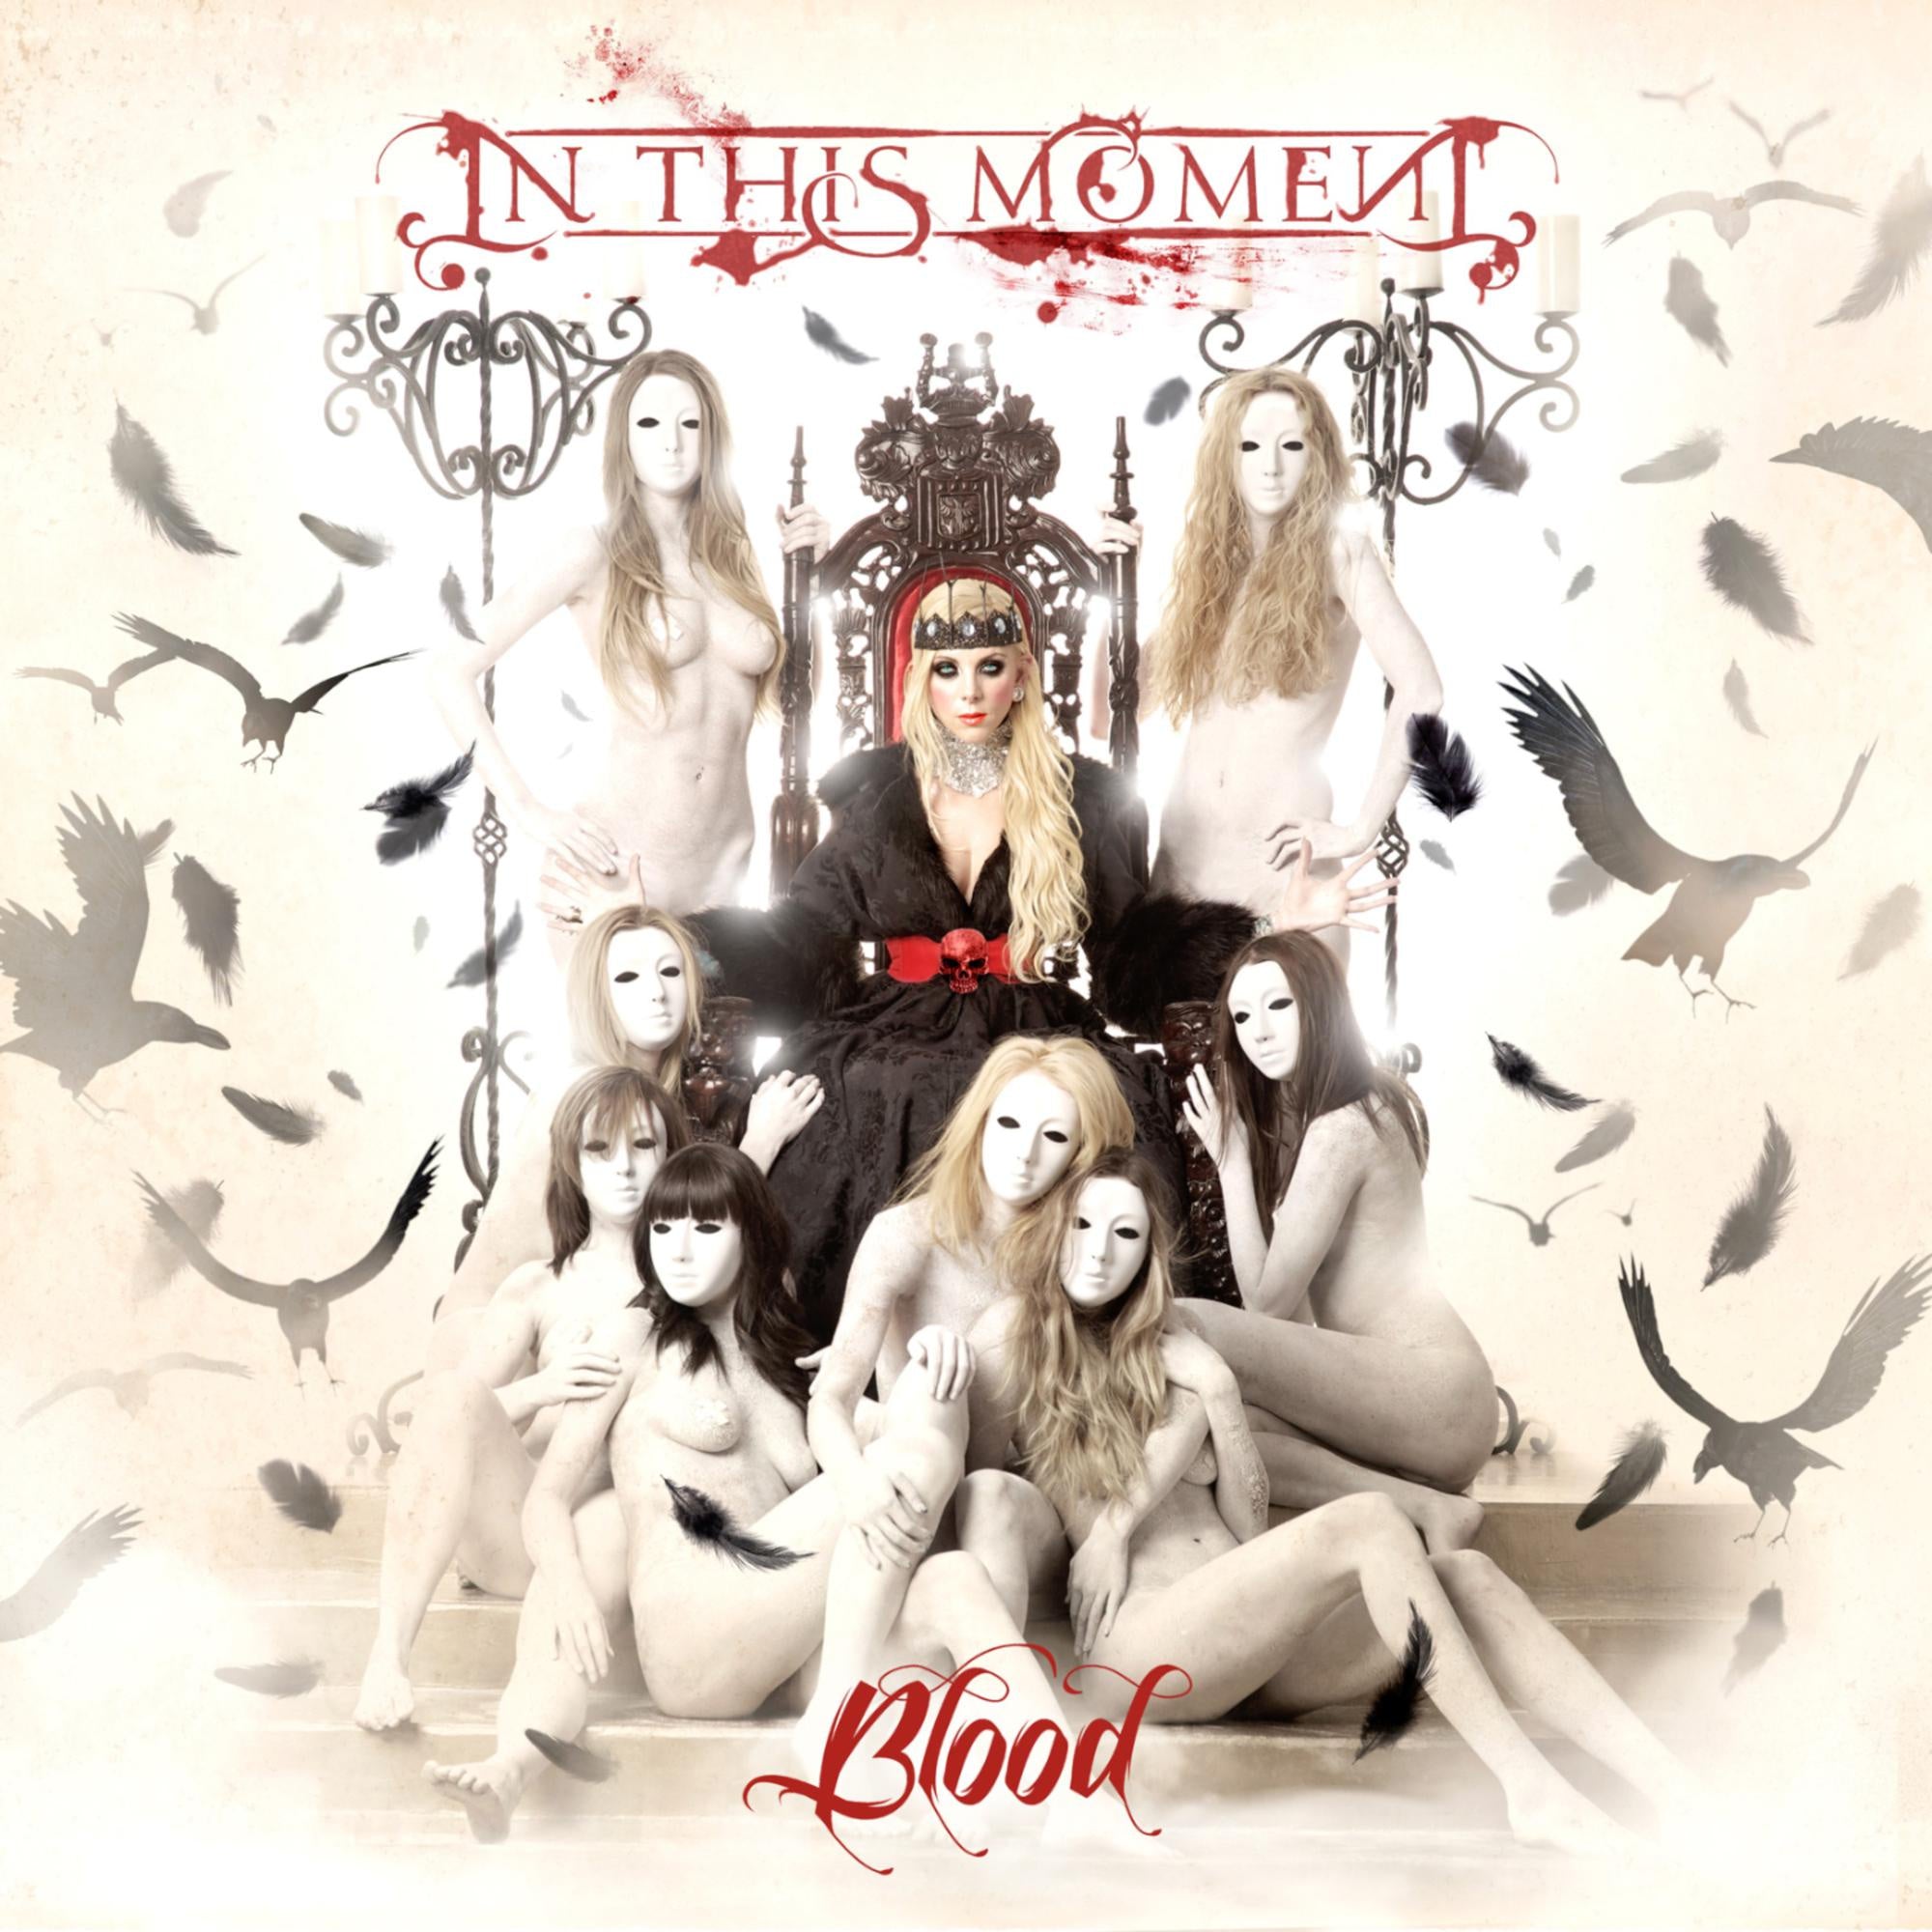 In This Moment ‎– Blood - New LP Record 2020 Century Family Limited Edition Clear With Blood Splatter Vinyl - Heavy Metal